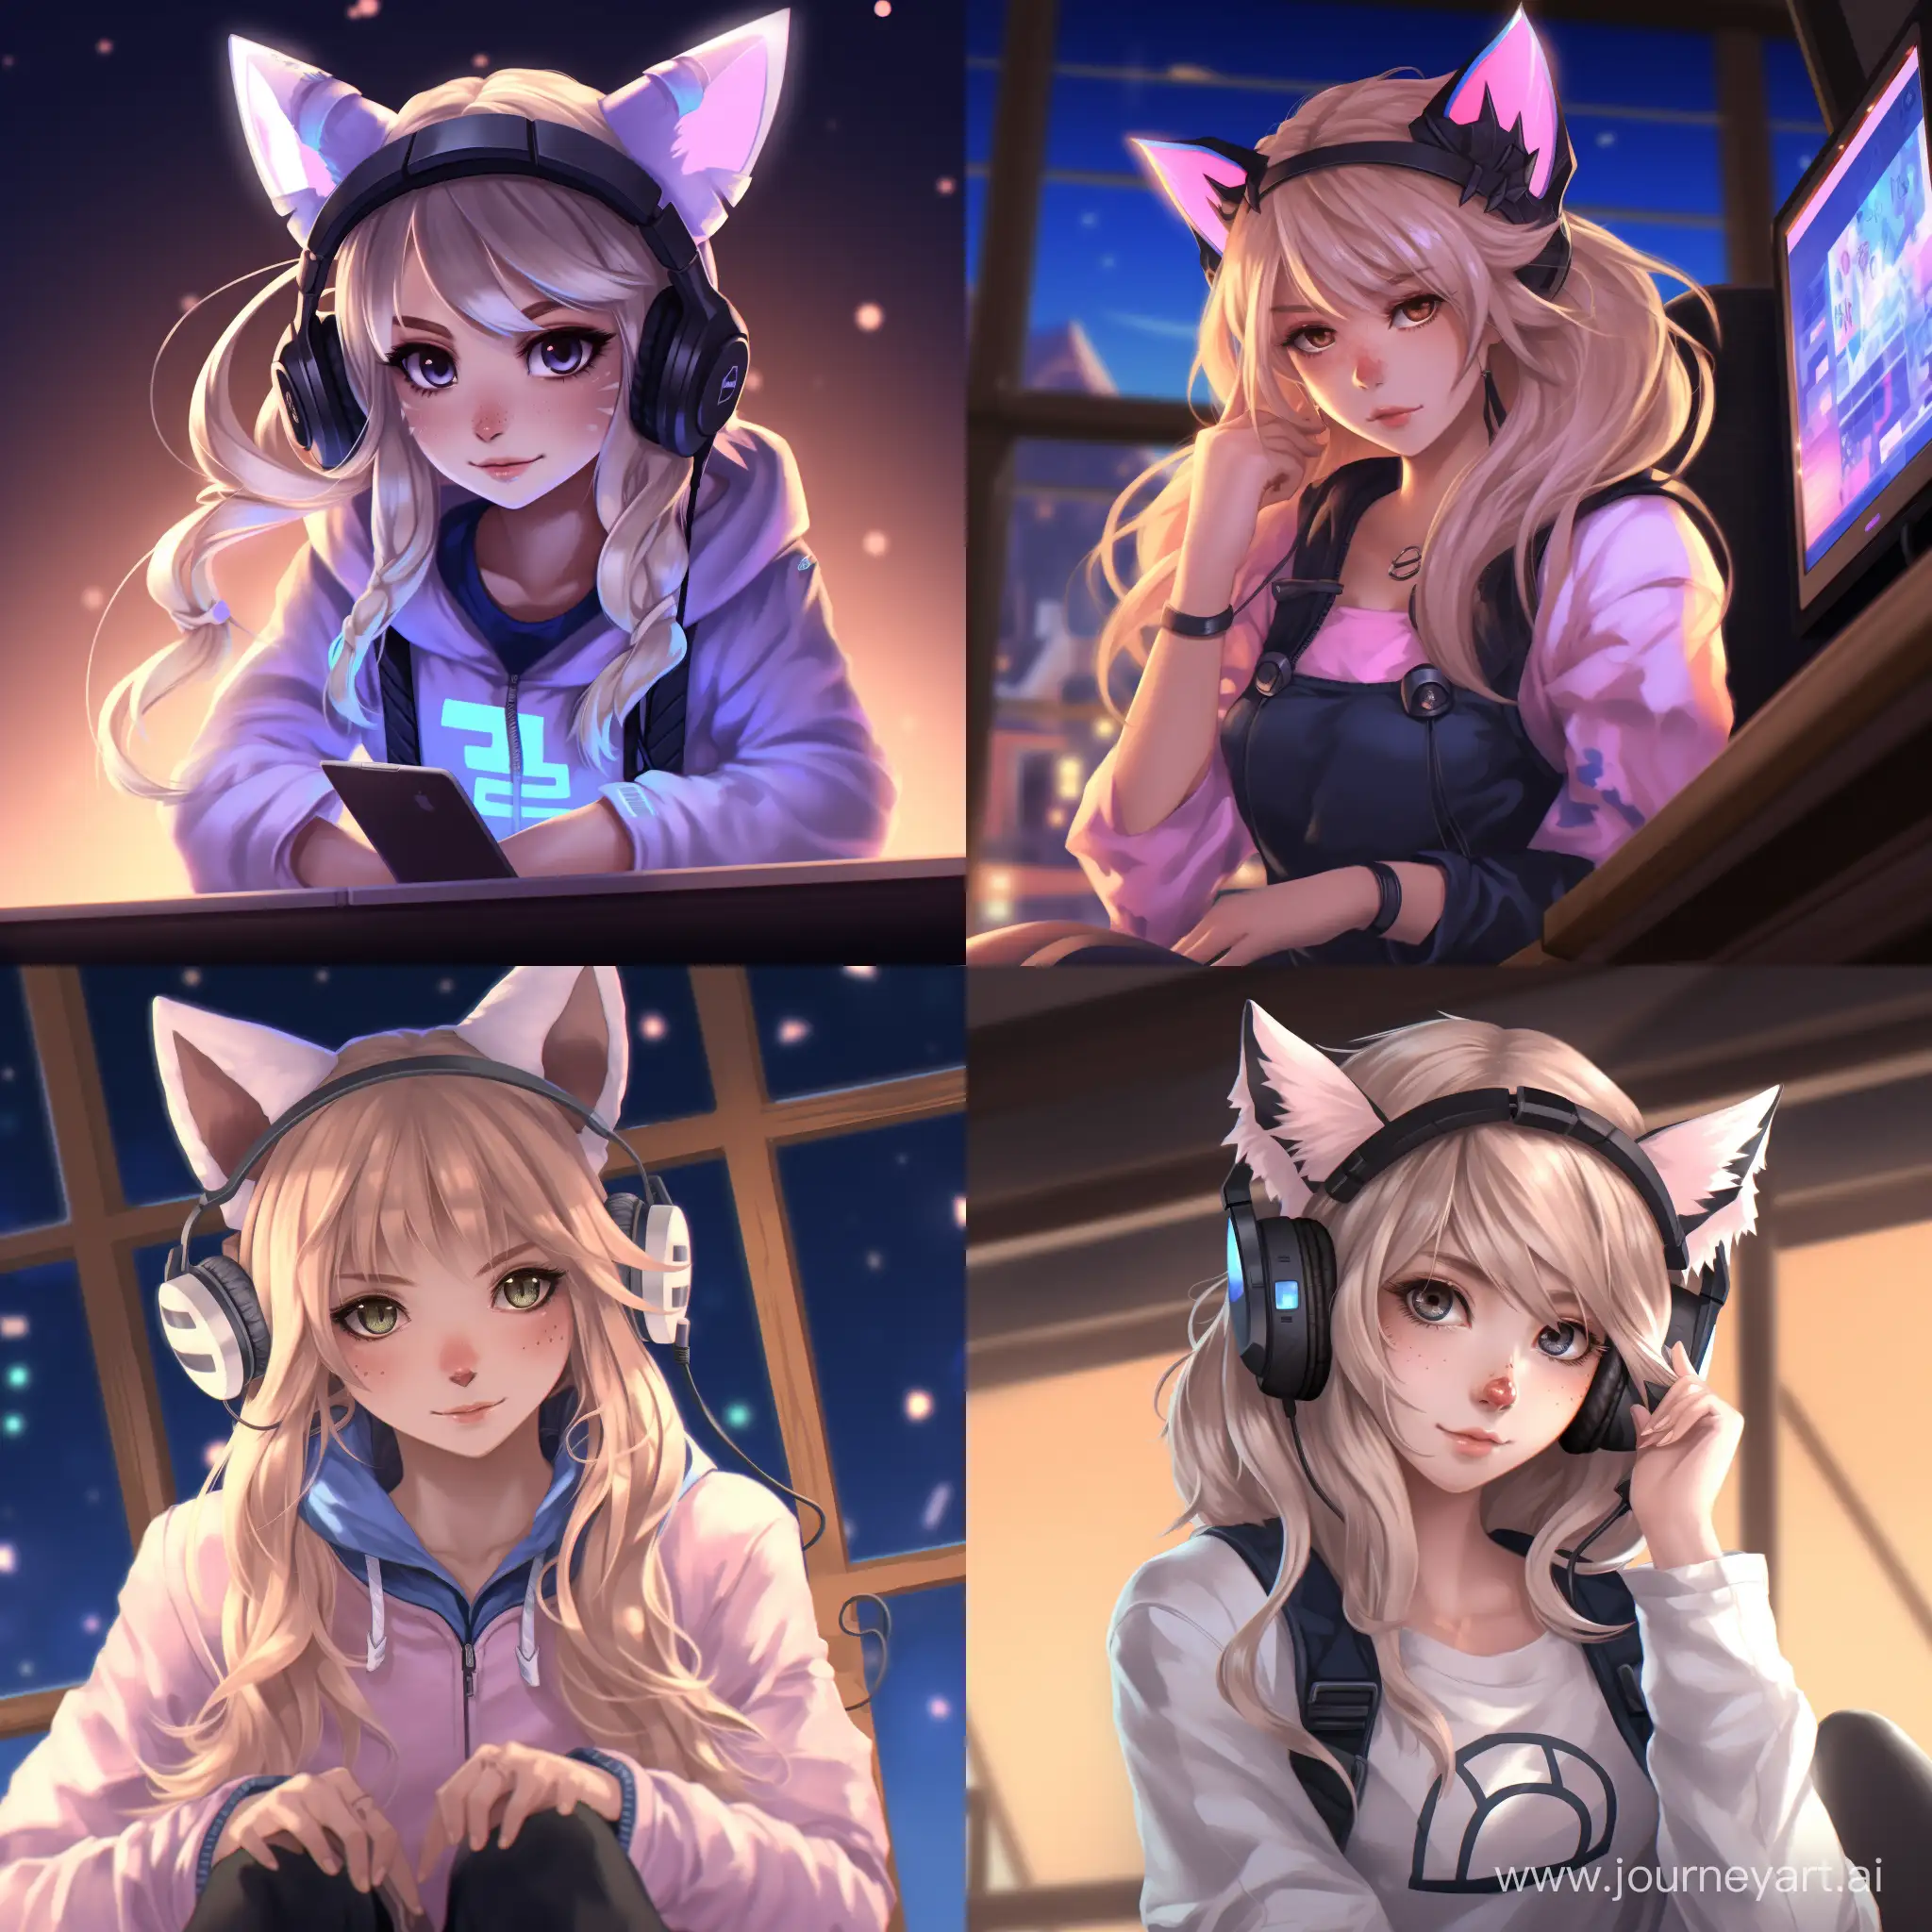 Anime-Style-Girl-Gamer-with-Cat-Ears-and-Light-Hair